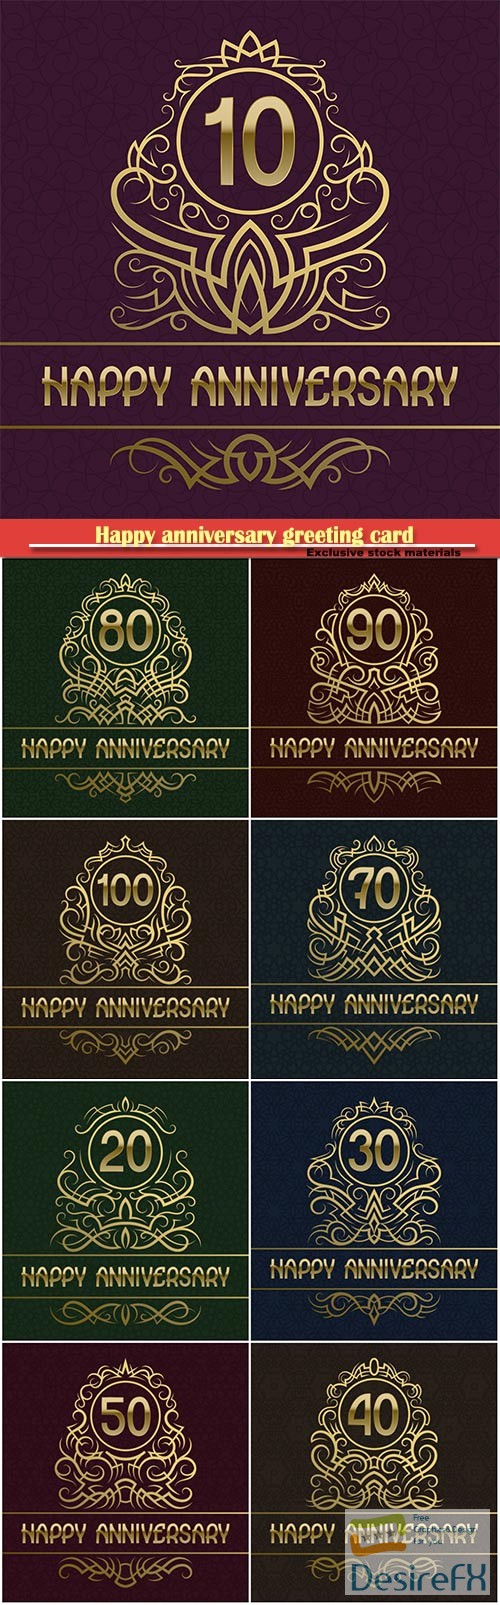 Happy anniversary greeting card with vintage design golden elements